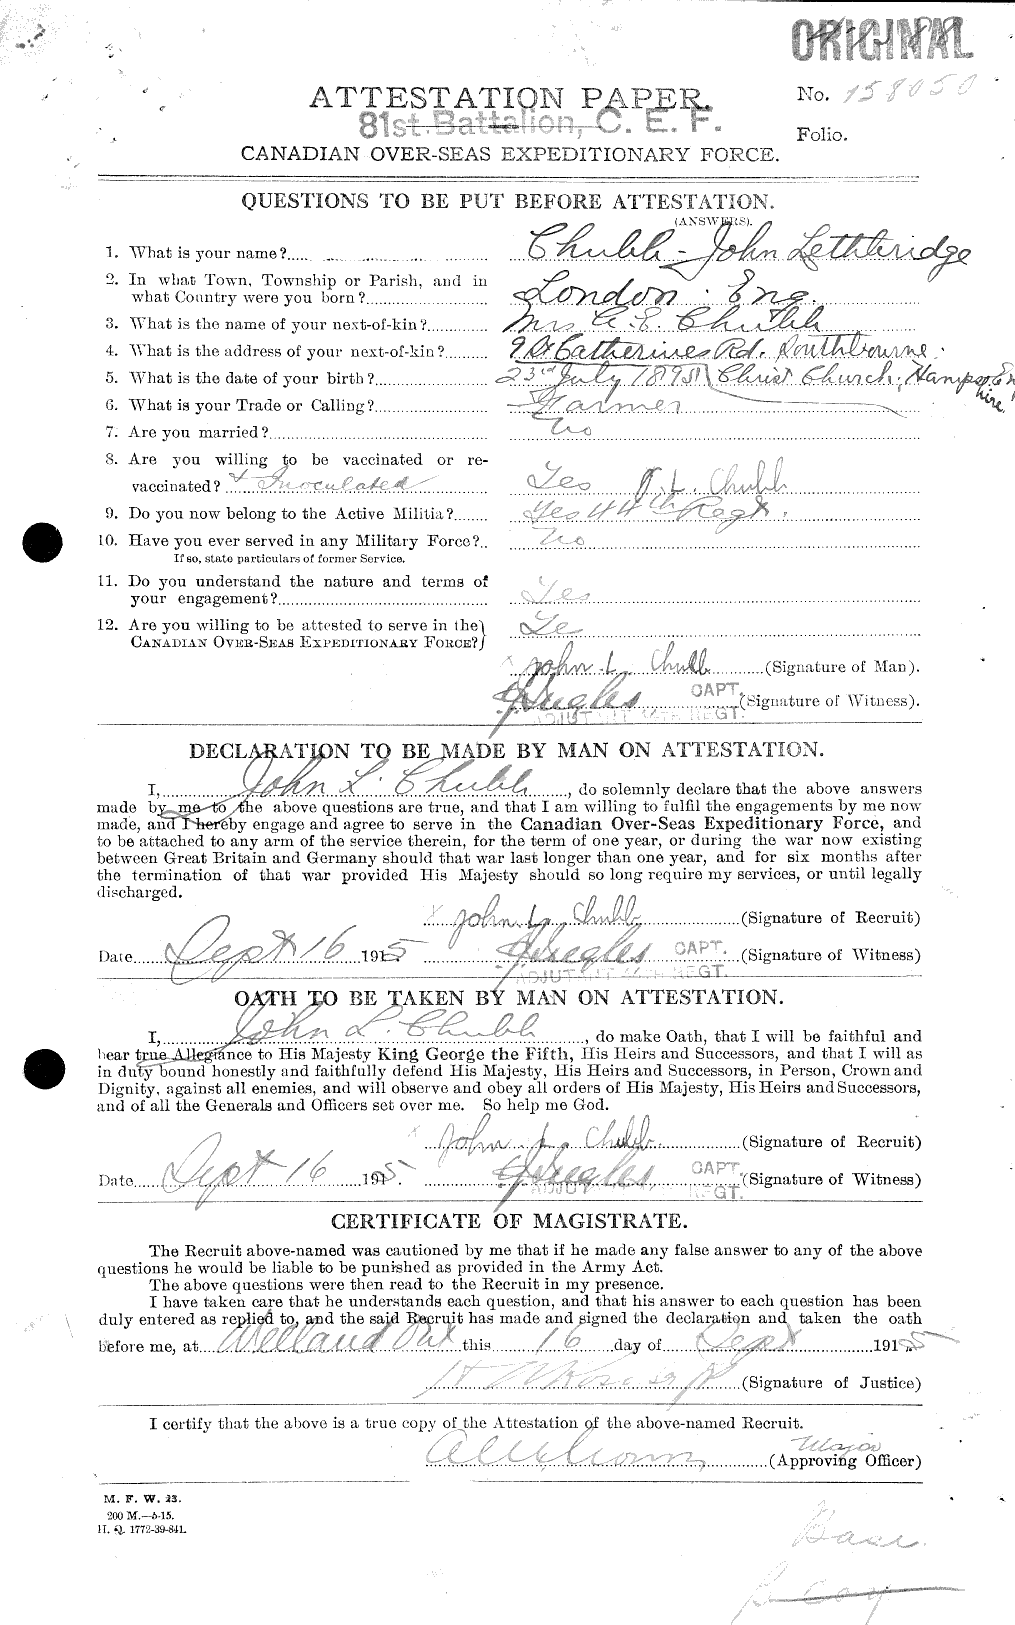 Personnel Records of the First World War - CEF 022267a